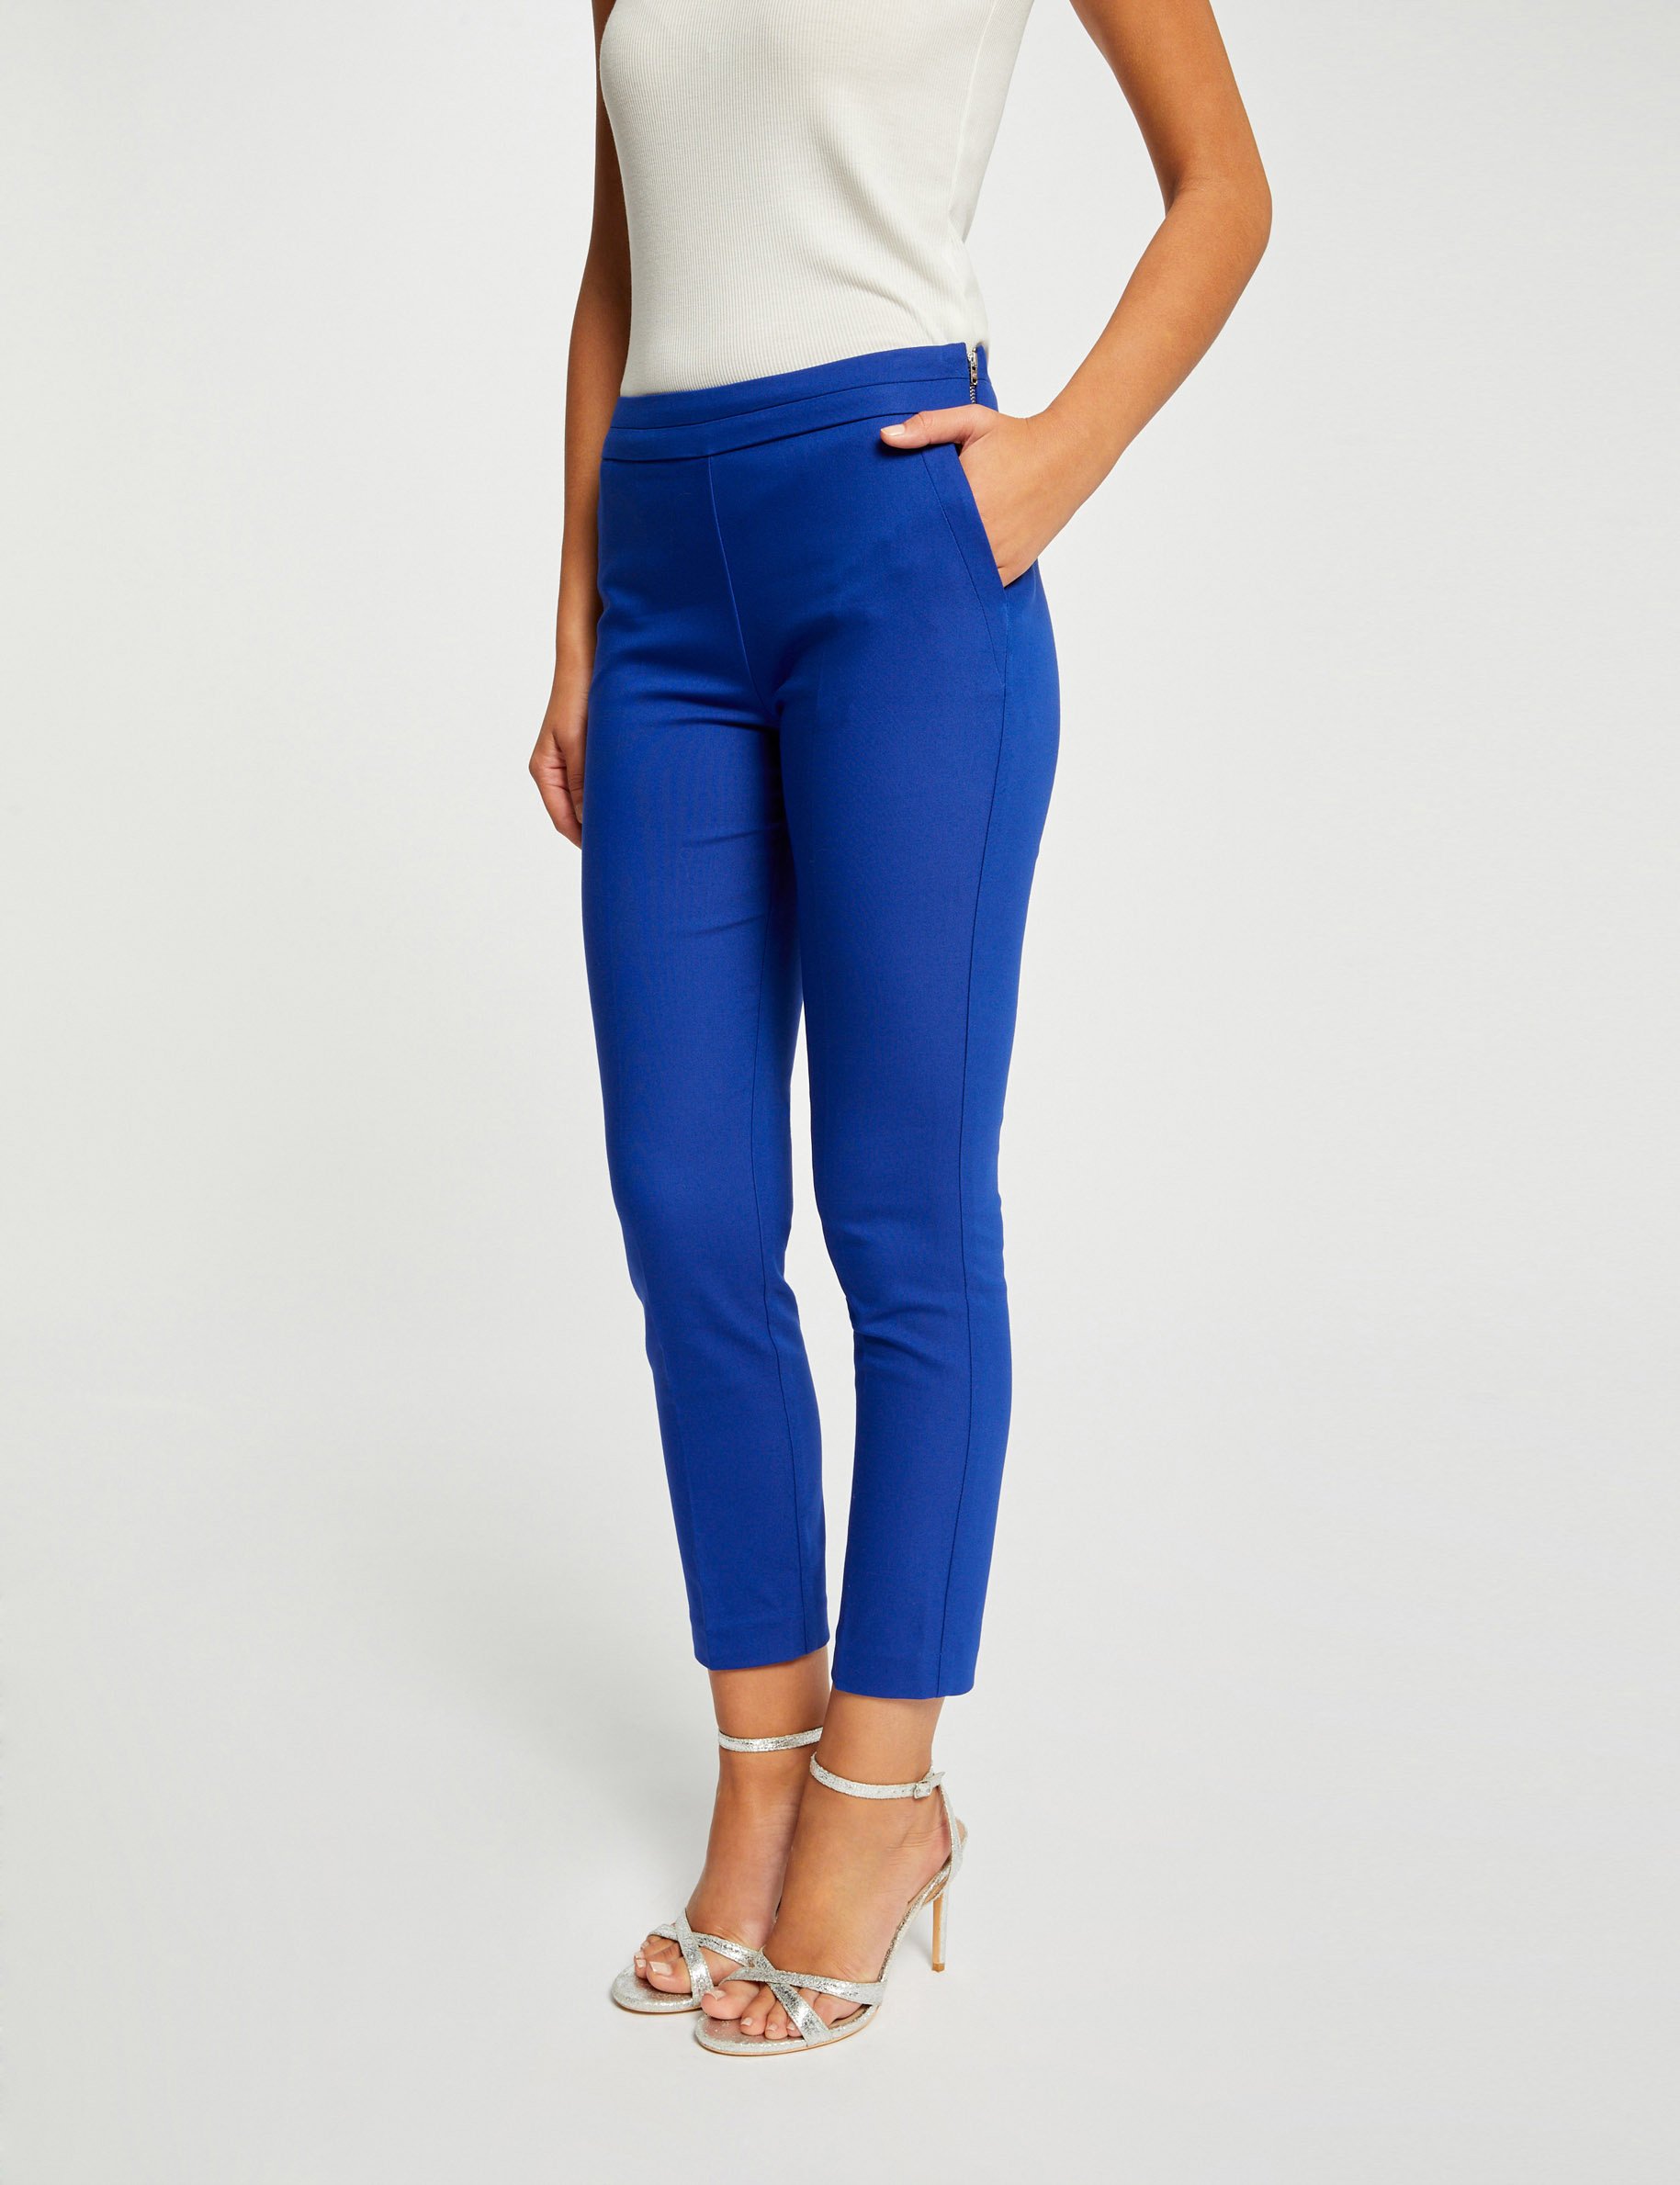 High-waisted tailored trousers - Navy blue - Ladies | H&M IN